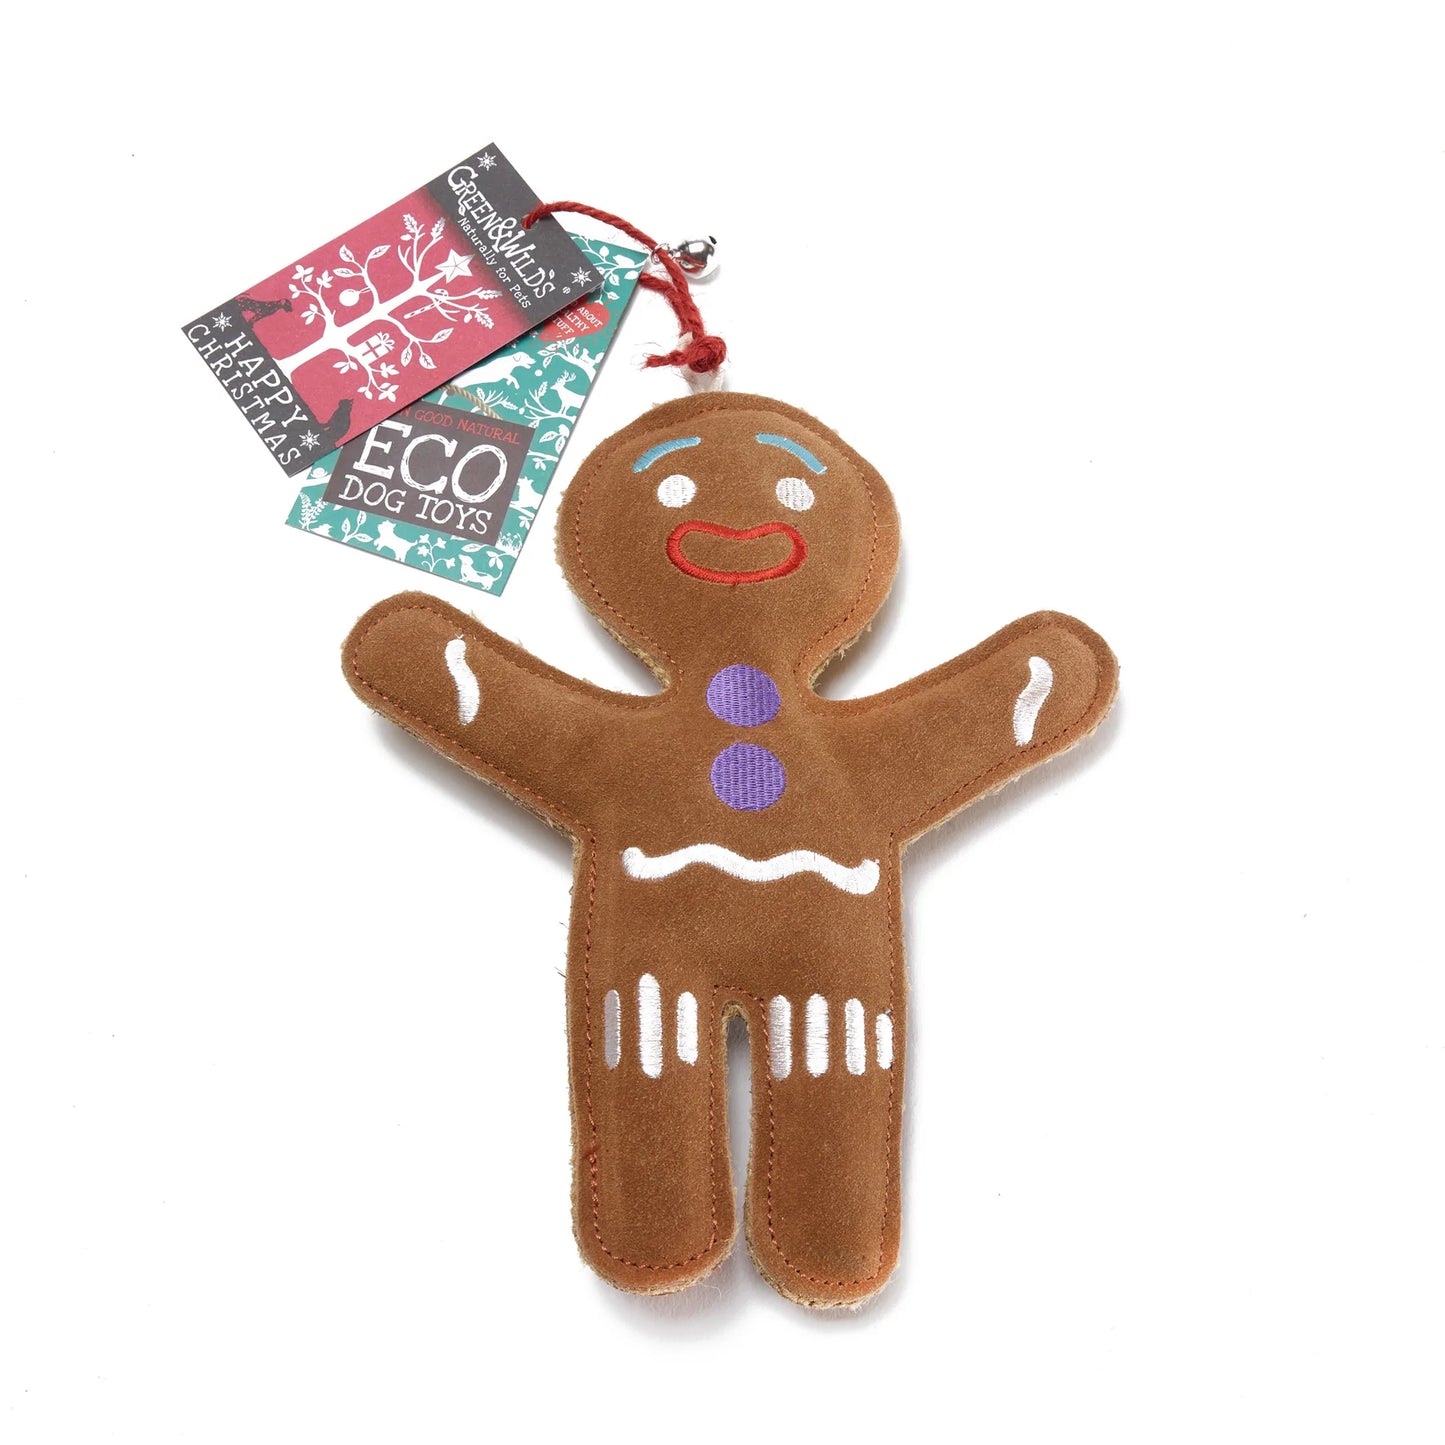 Jean Genie the Gingerbread Person